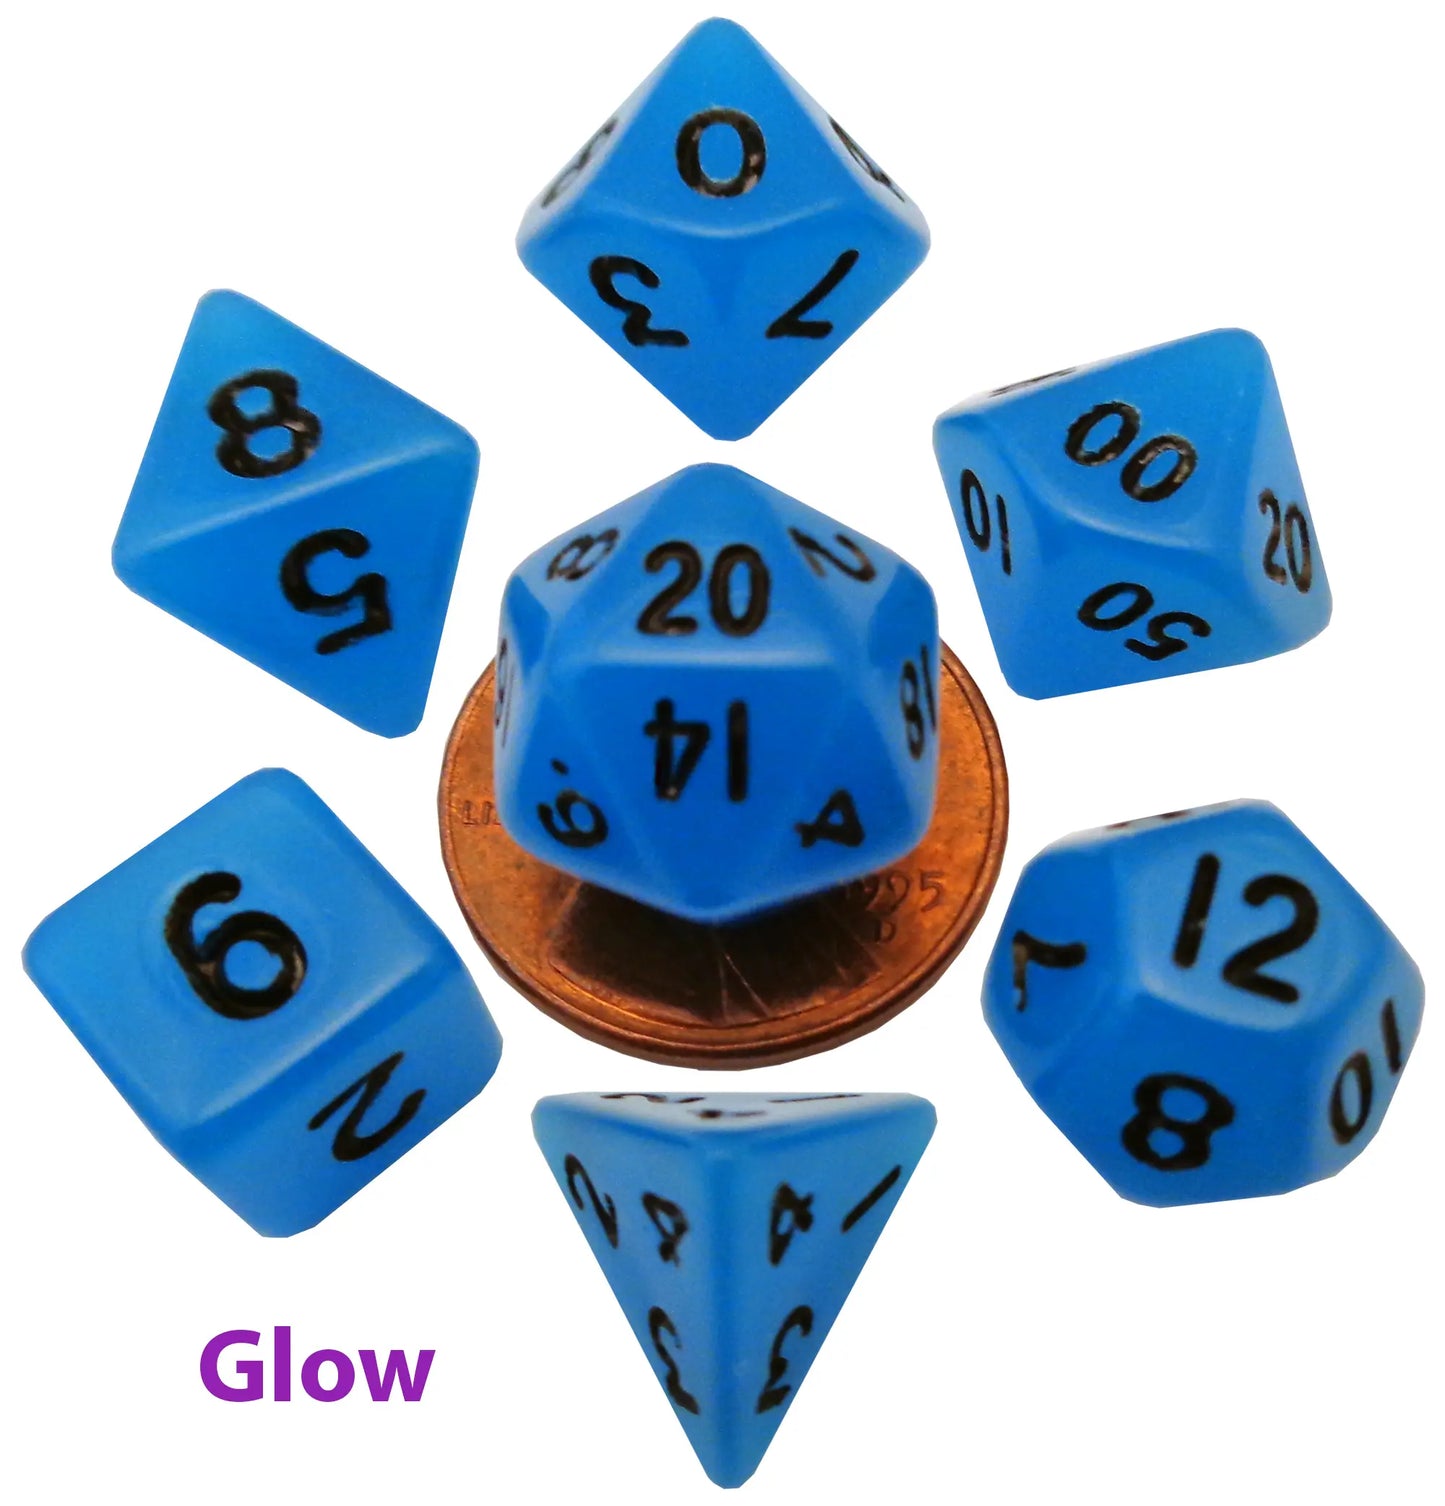 10mm Mini Acrylic Polyhedral Set - Glow Blue with Black Numbers